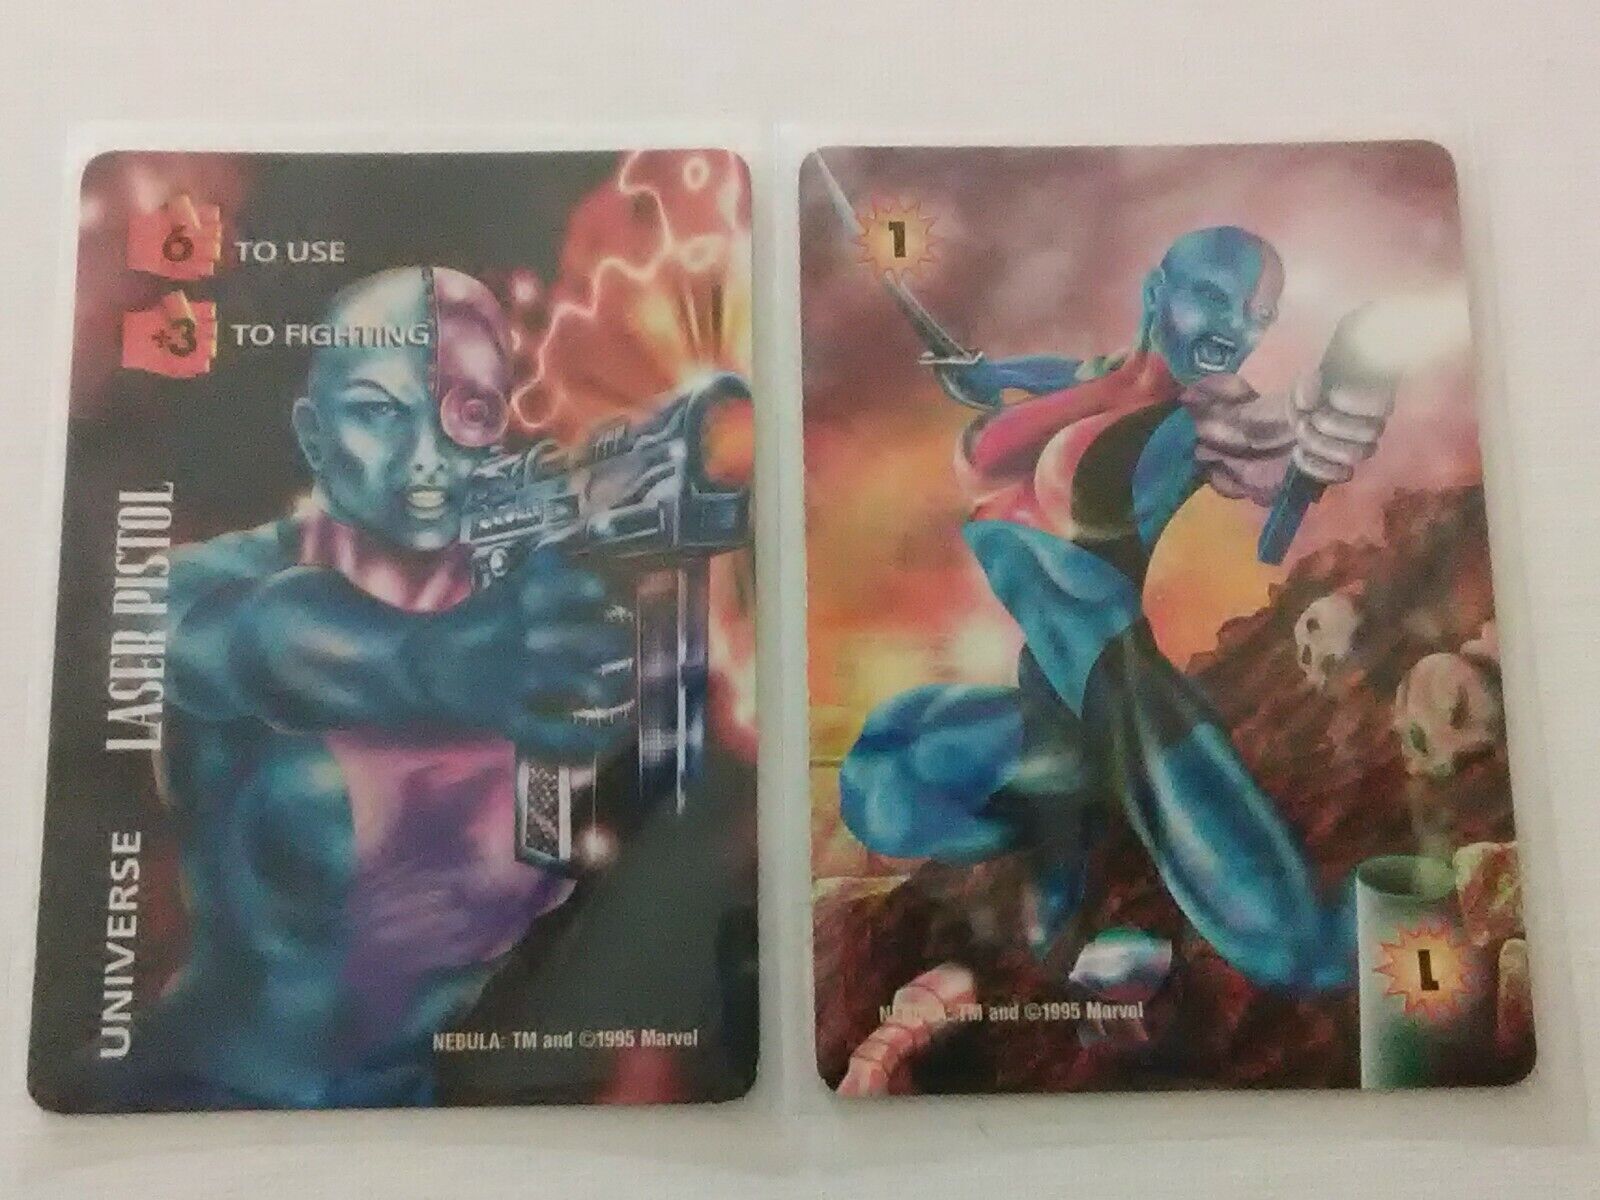 1995 NEBULA GUARDIANS OF THE GALAXY 2x MARVEL OVERPOWER Cards lot, Near Mint 9.8